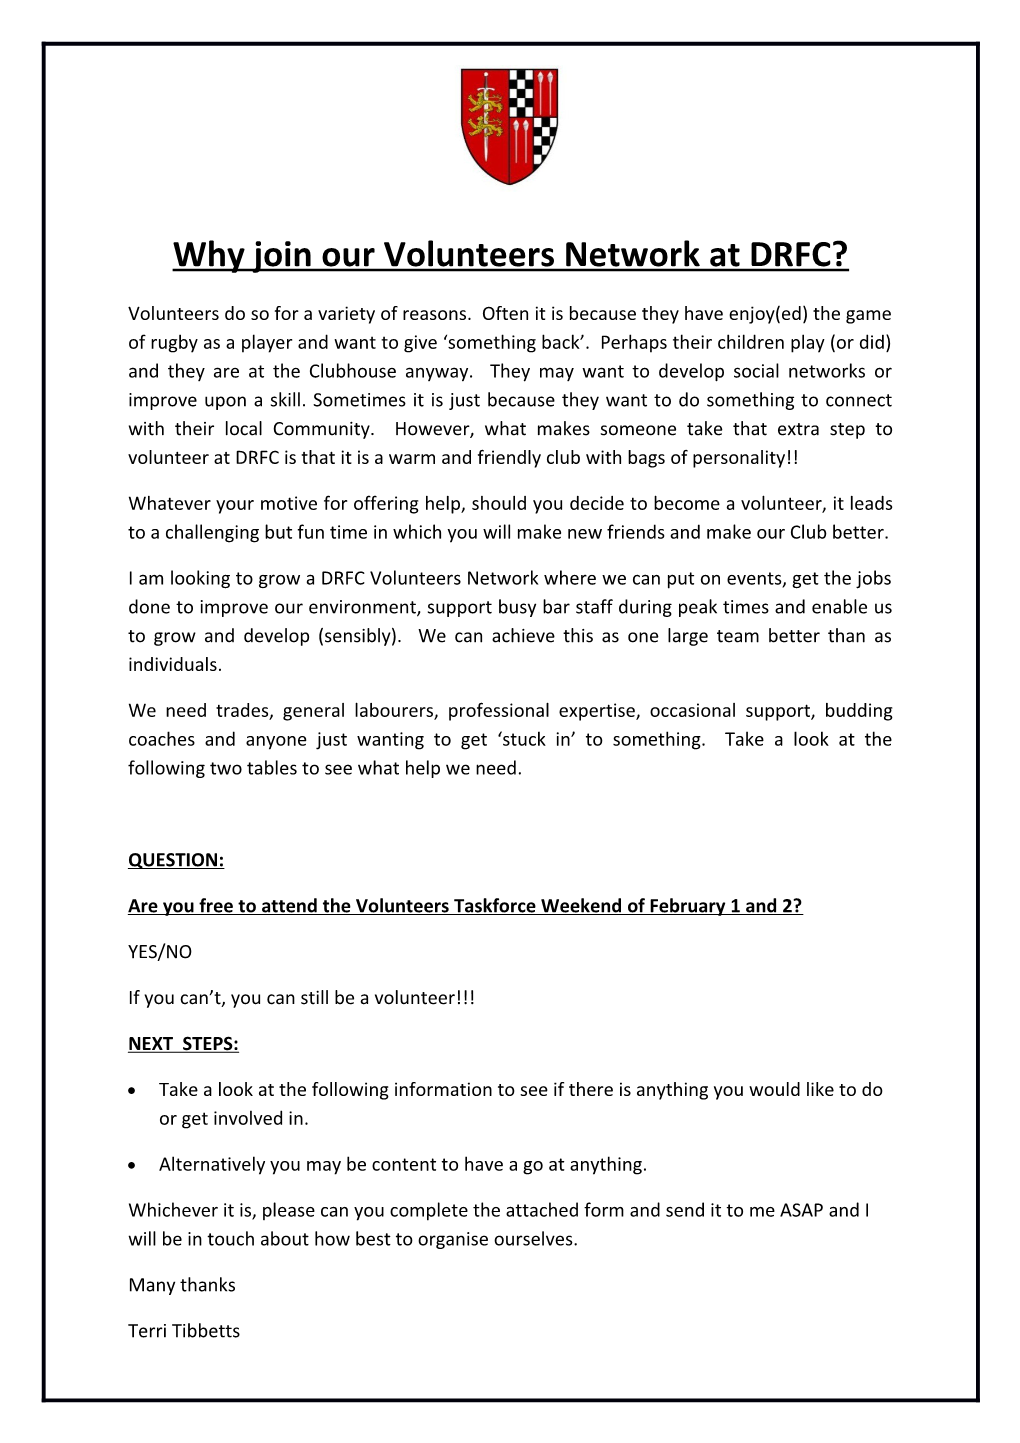 Whyjoin Our Volunteers Network at DRFC?